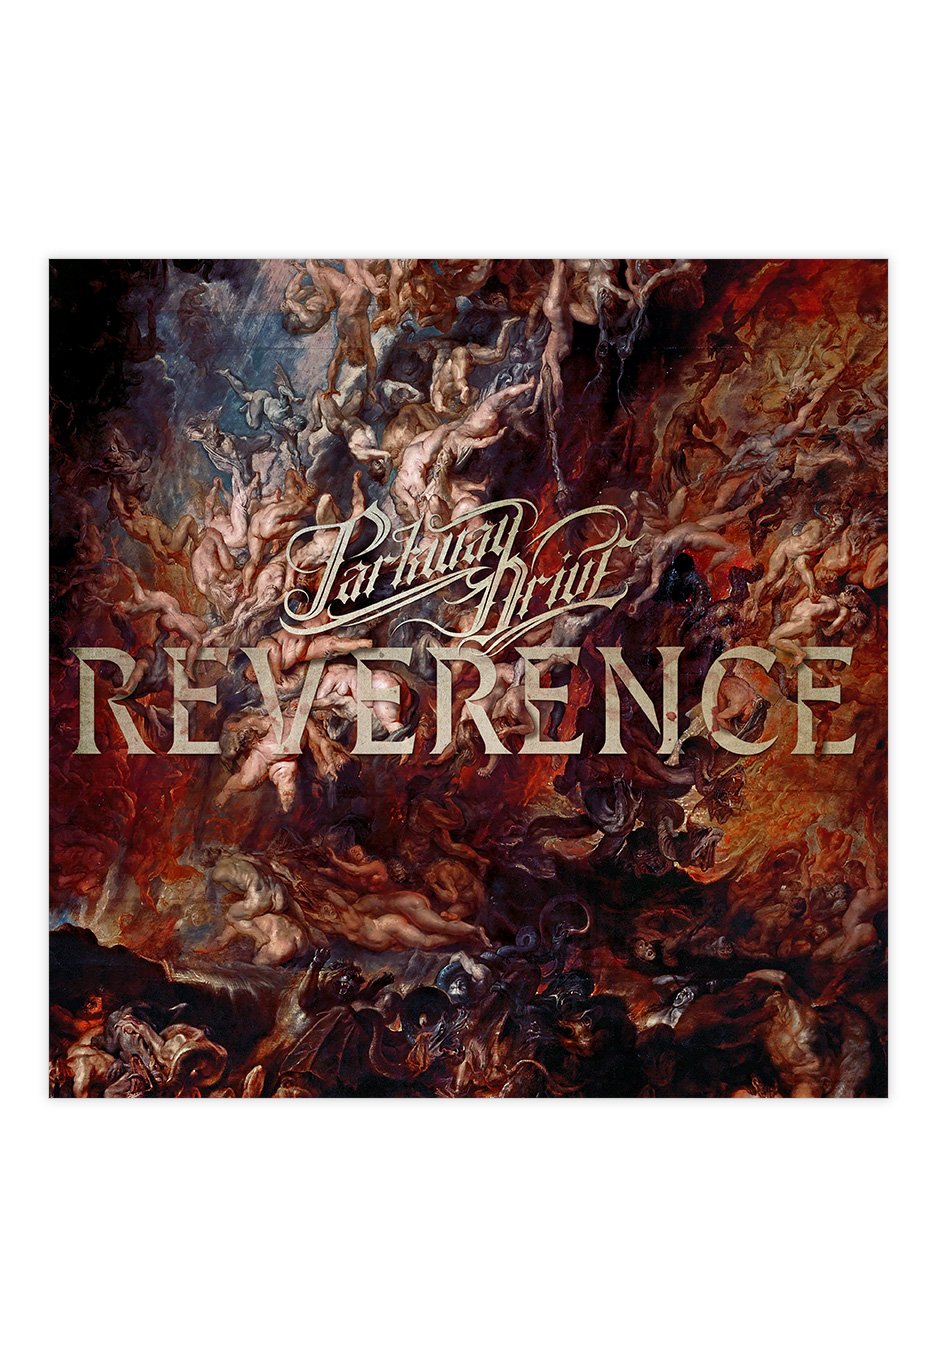 Parkway Drive - Reverence - CD